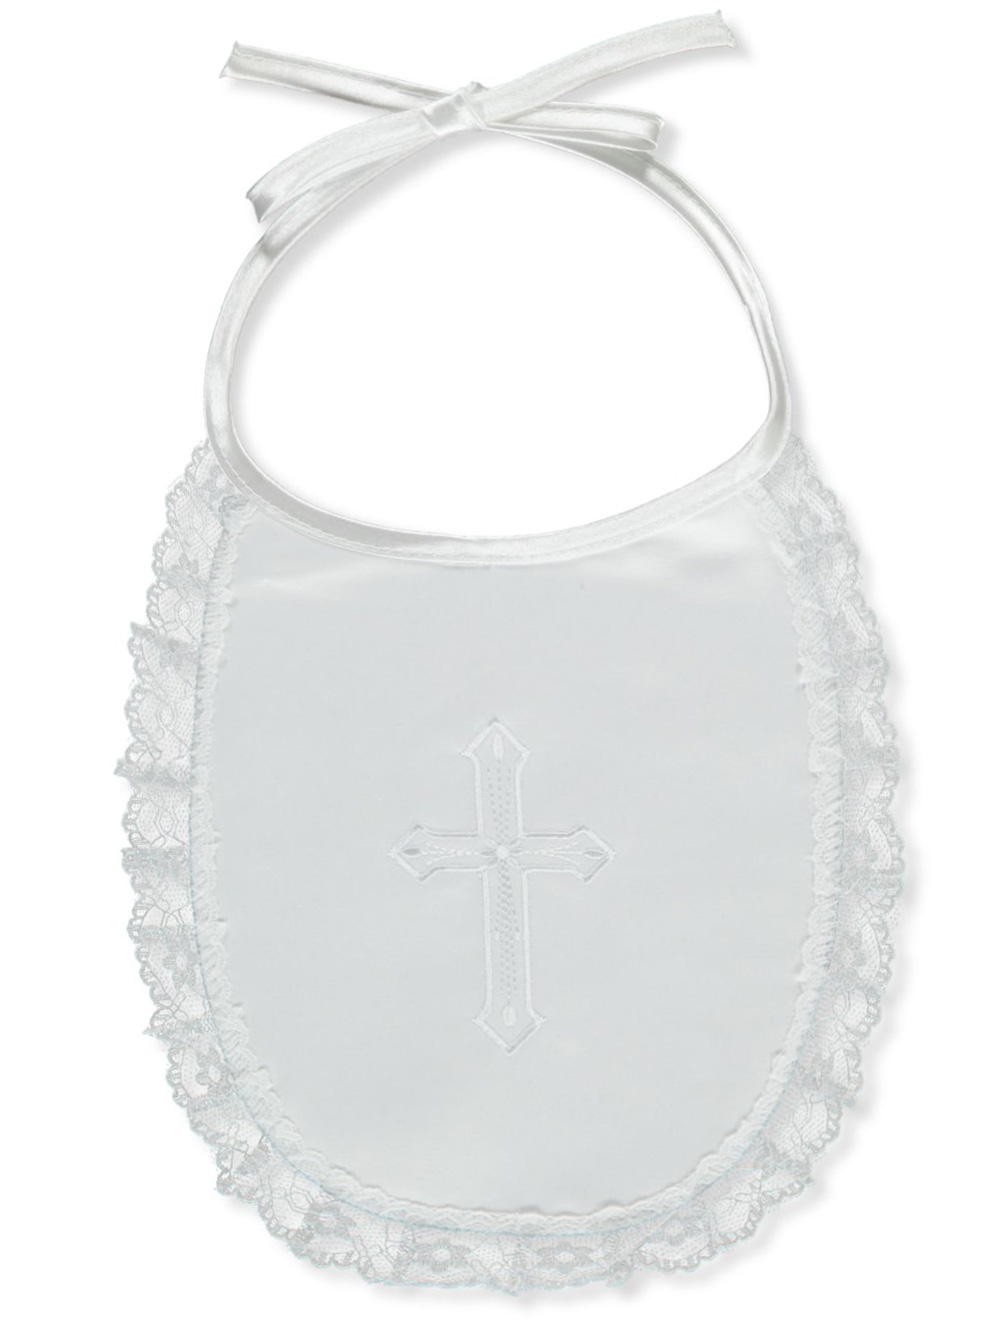 Baptism and Christening Embroidered Baby Bib